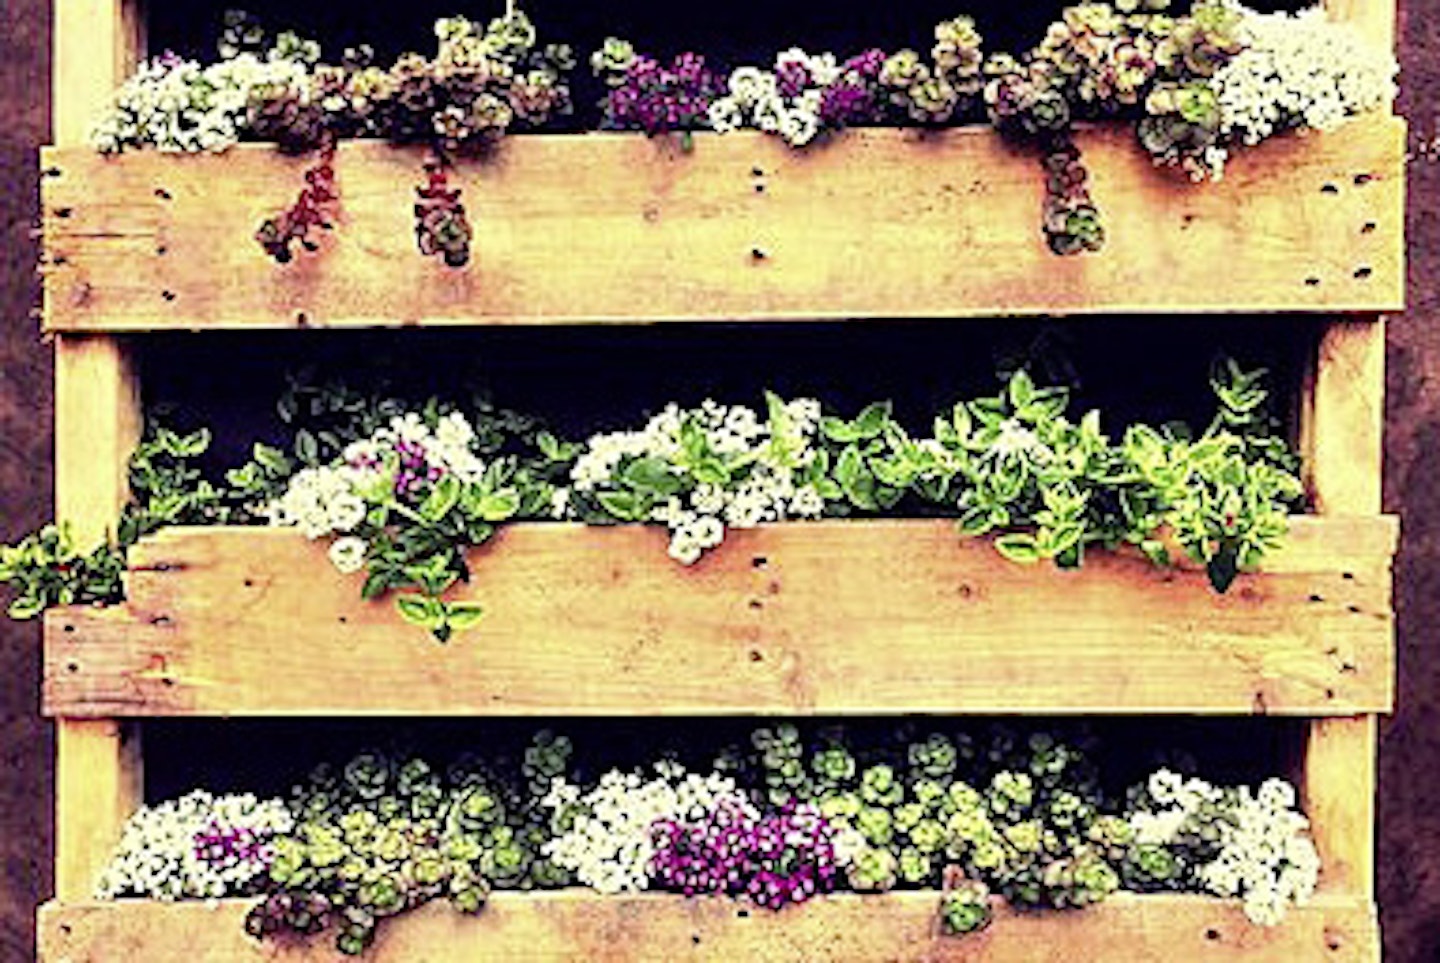 How To Plant Up A Vertical Garden!